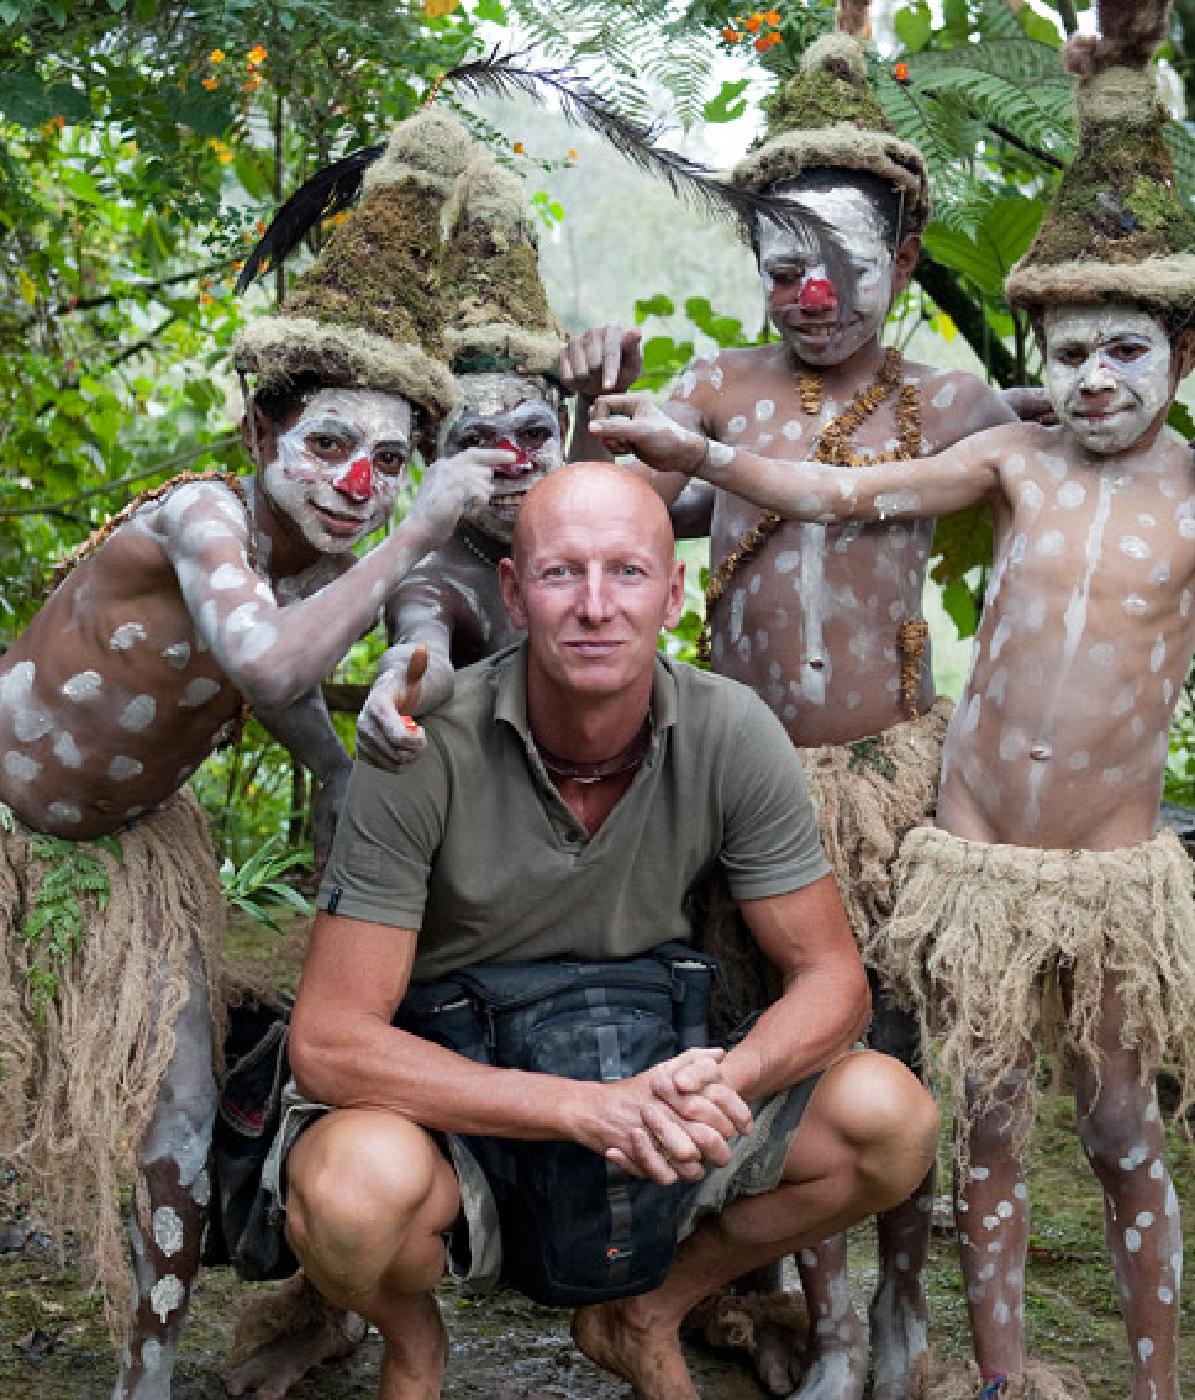                             Jimmy Nelson in Goroka, Papua New Guinea, where he photographed indigenous peoples for his 2013, book <i>Before They Pass Away</i>.